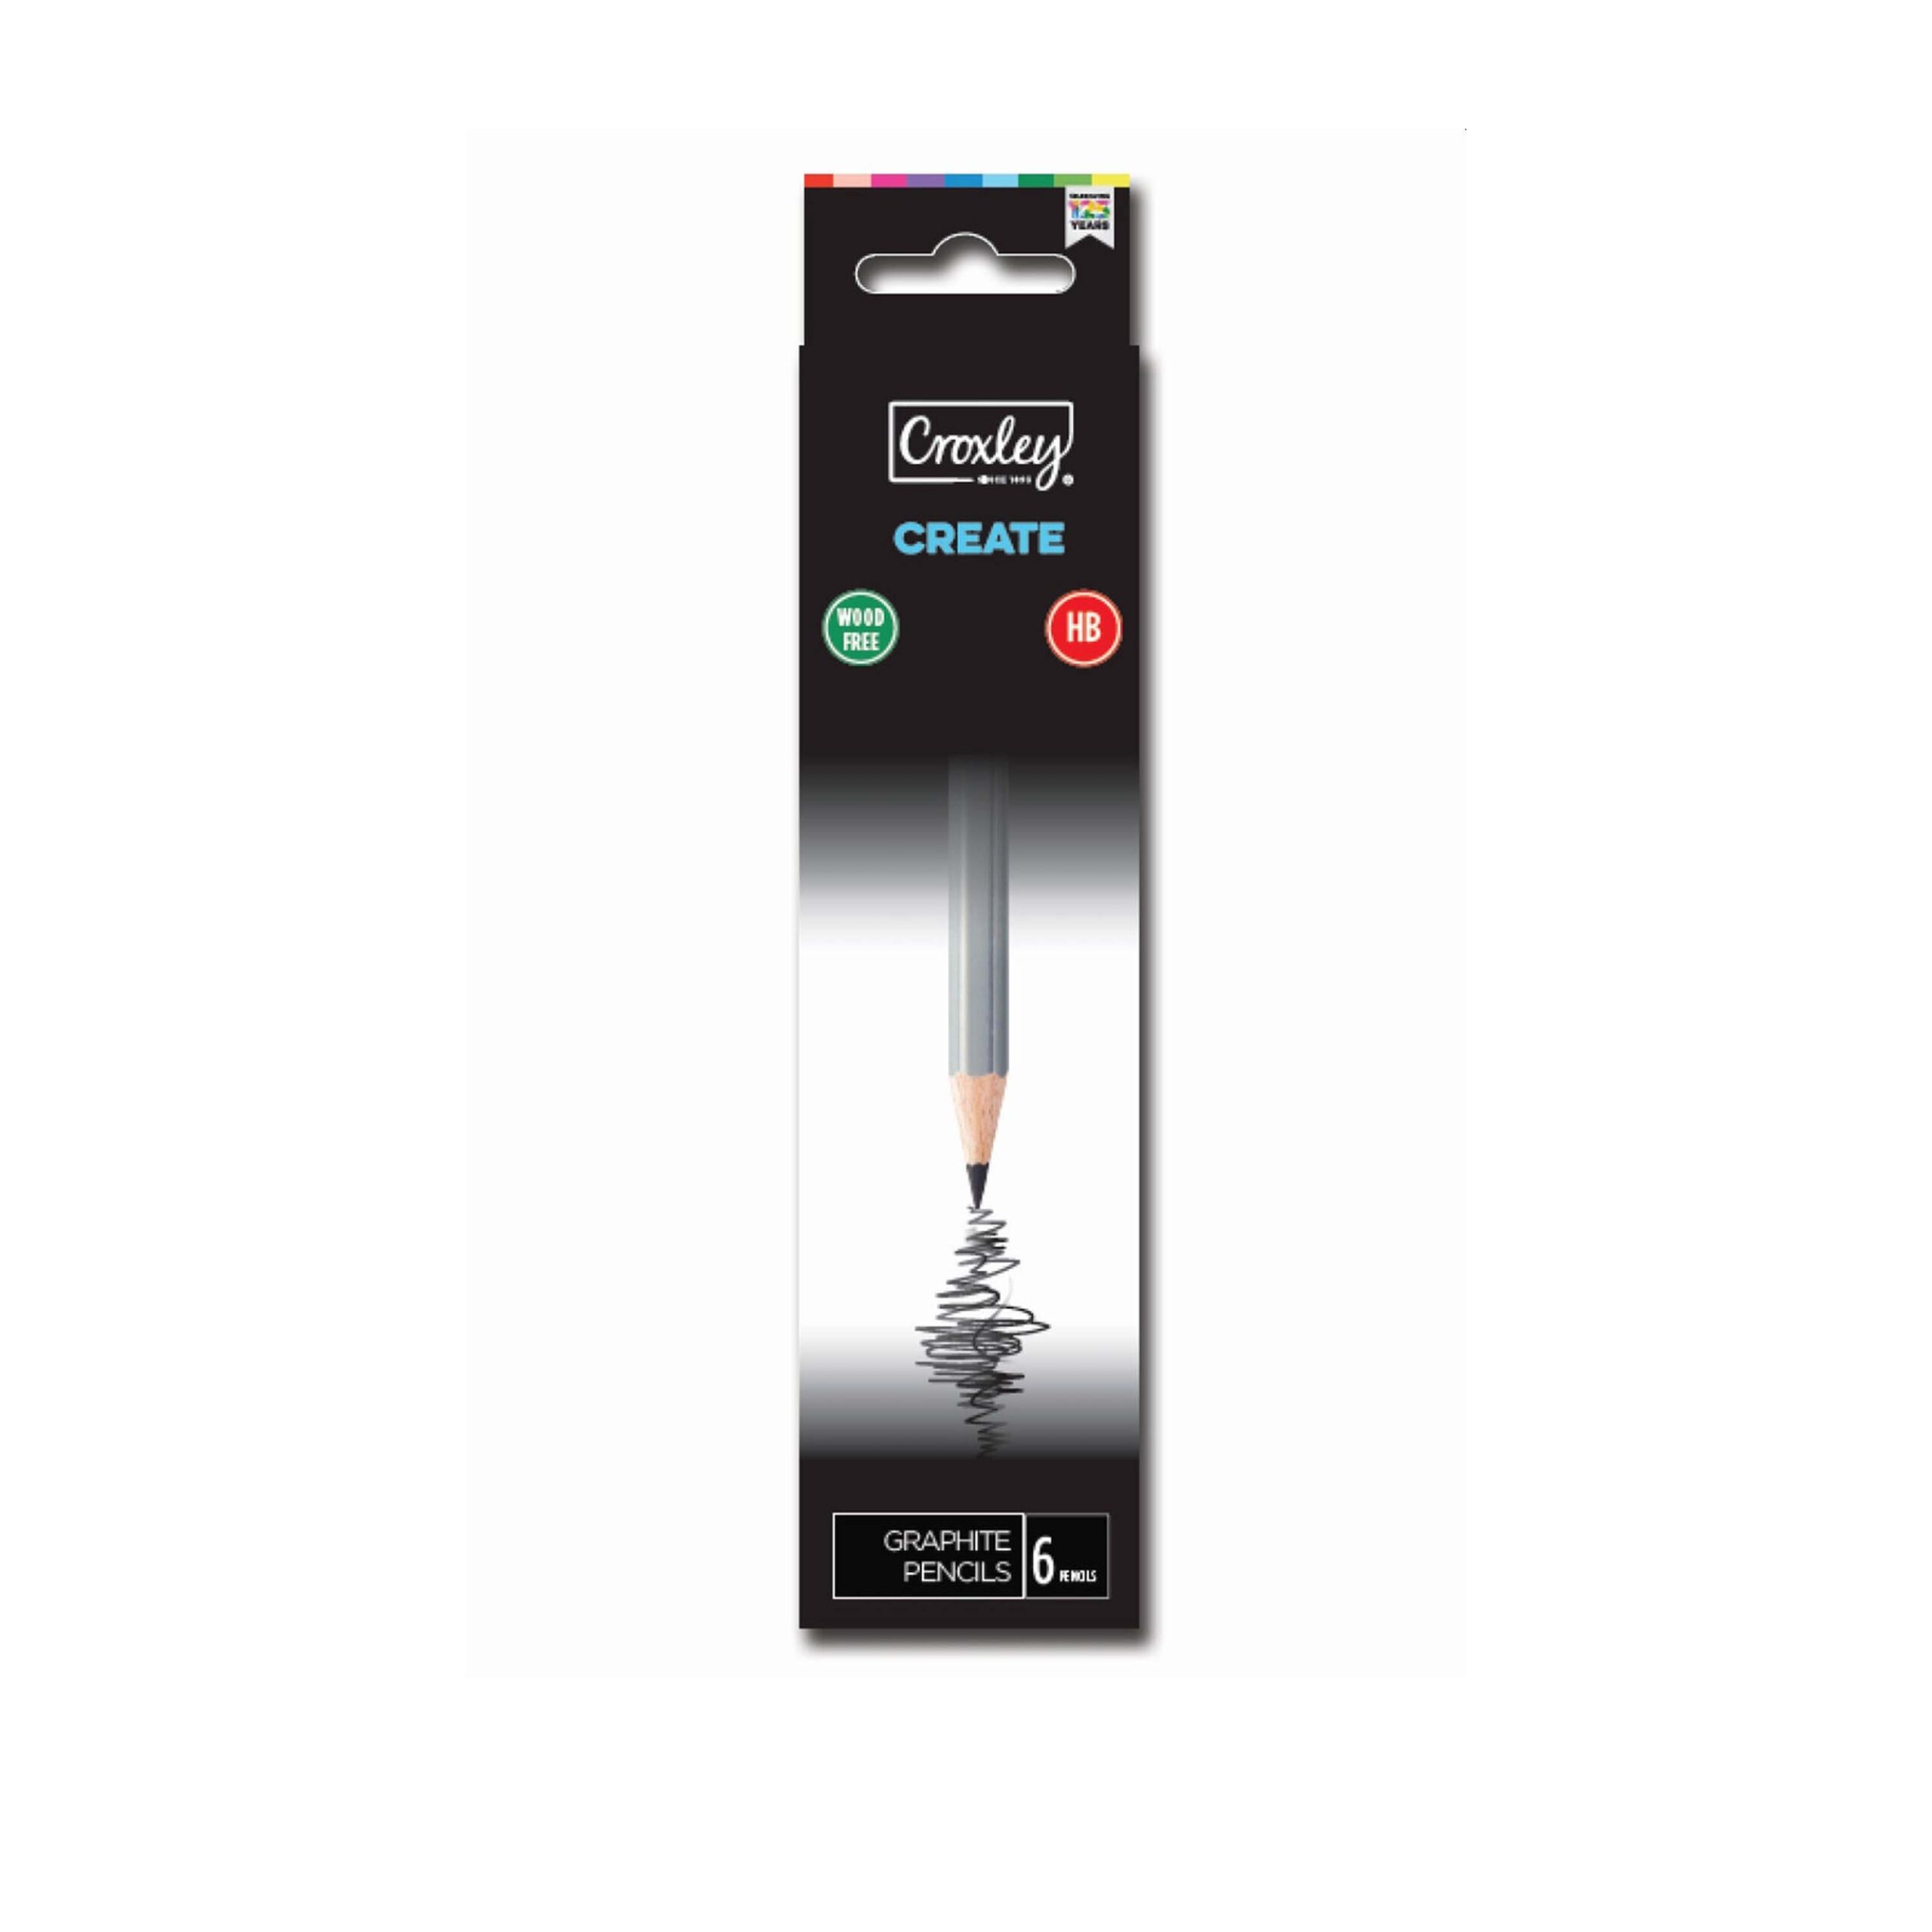 PACK (6) CROXLEY
WOOD FREE
GRAPHITE
PENCILS